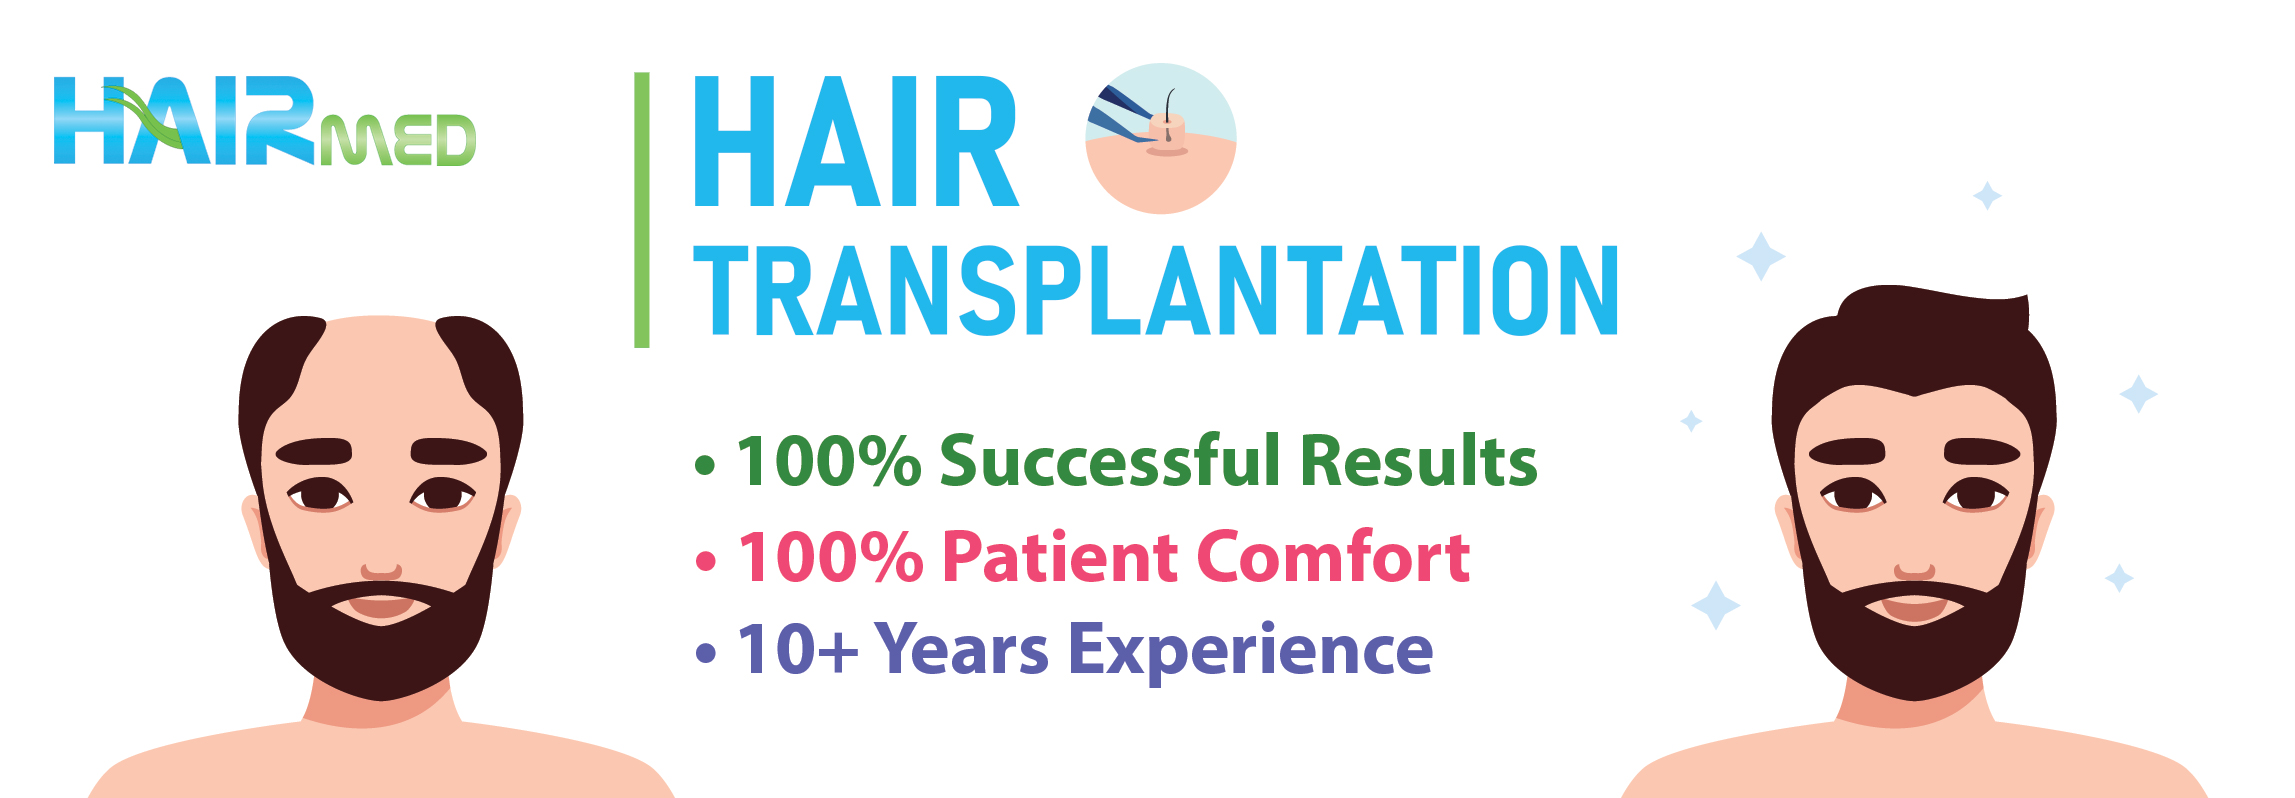 Hair Transplant with FUE Technique in Antalya Turkey